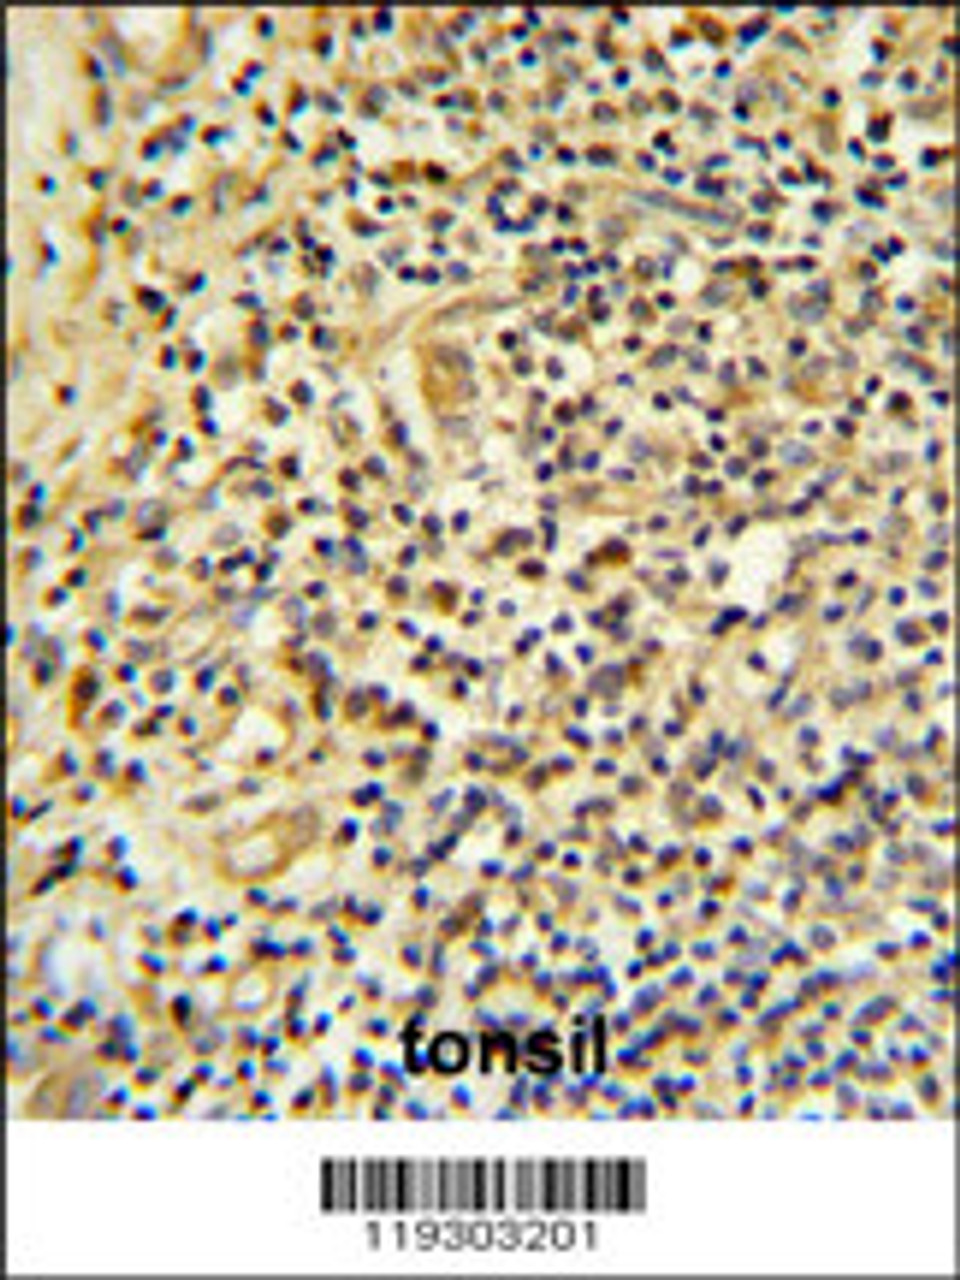 FKBP11 Antibody IHC analysis in formalin fixed and paraffin embedded human tonsil tissue followed by peroxidase conjugation of the secondary antibody and DAB staining.